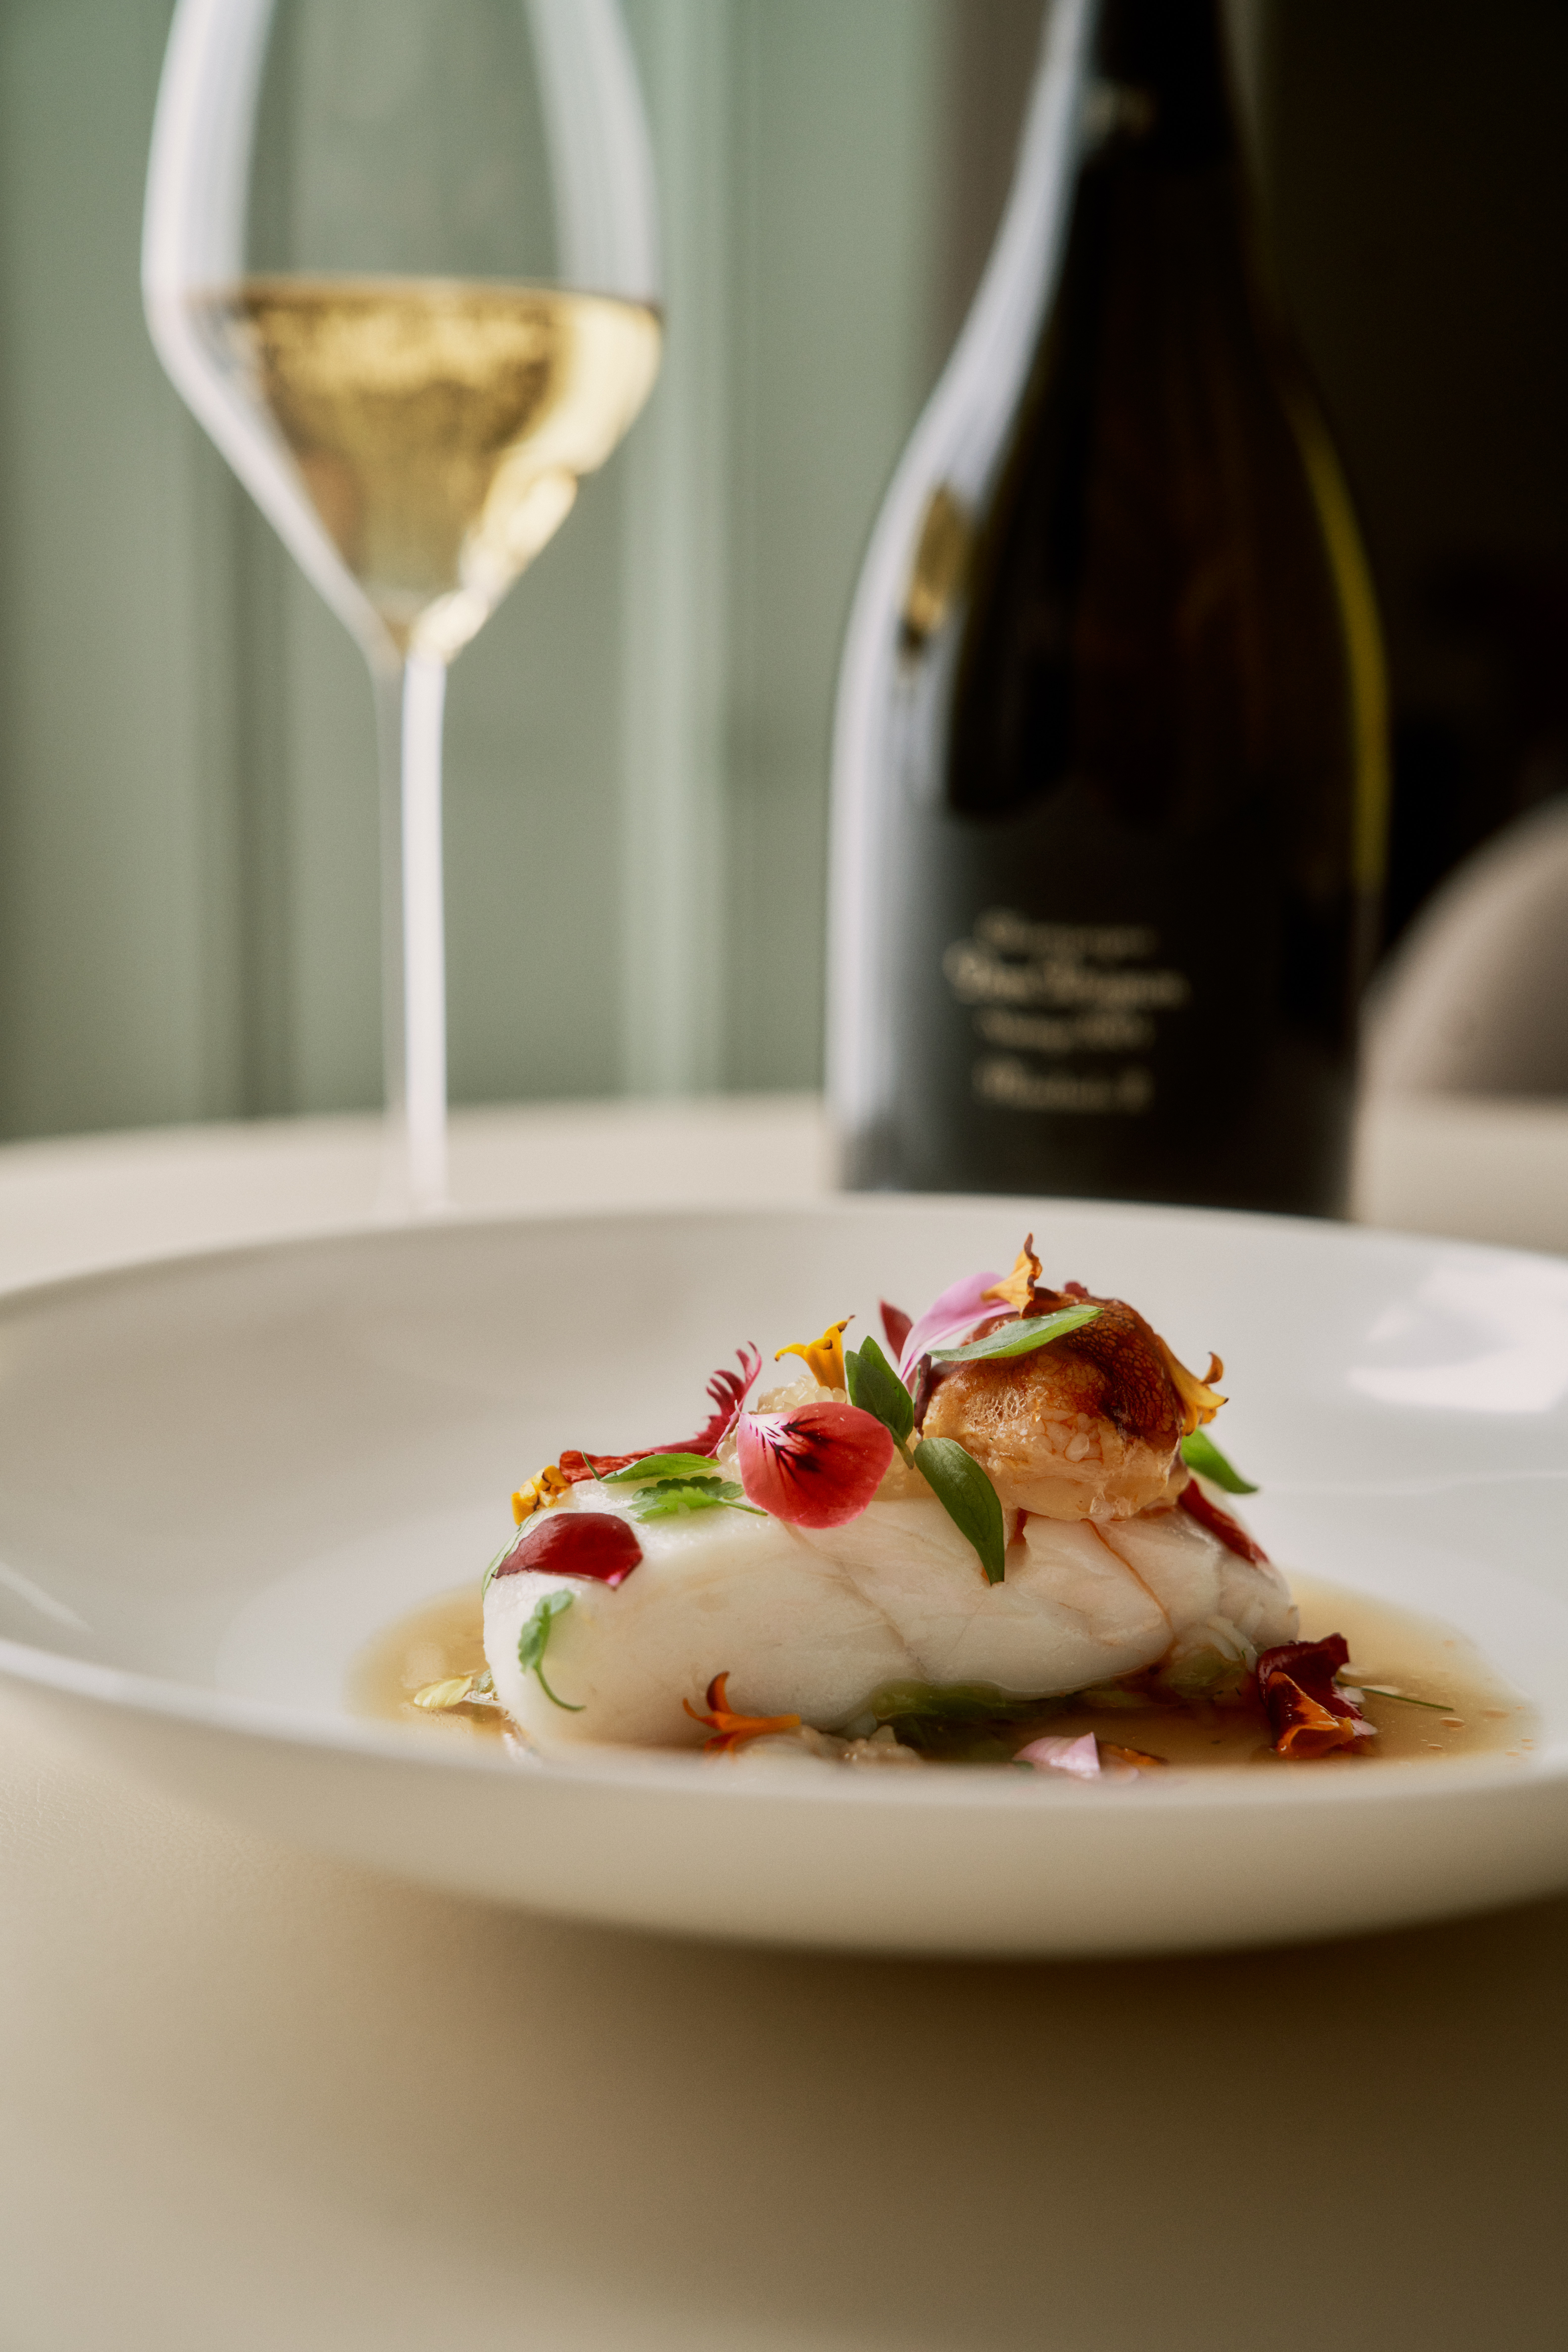 The Cornish Turbot perfectly paired with Dom Pérignon Plénitude 2 2004